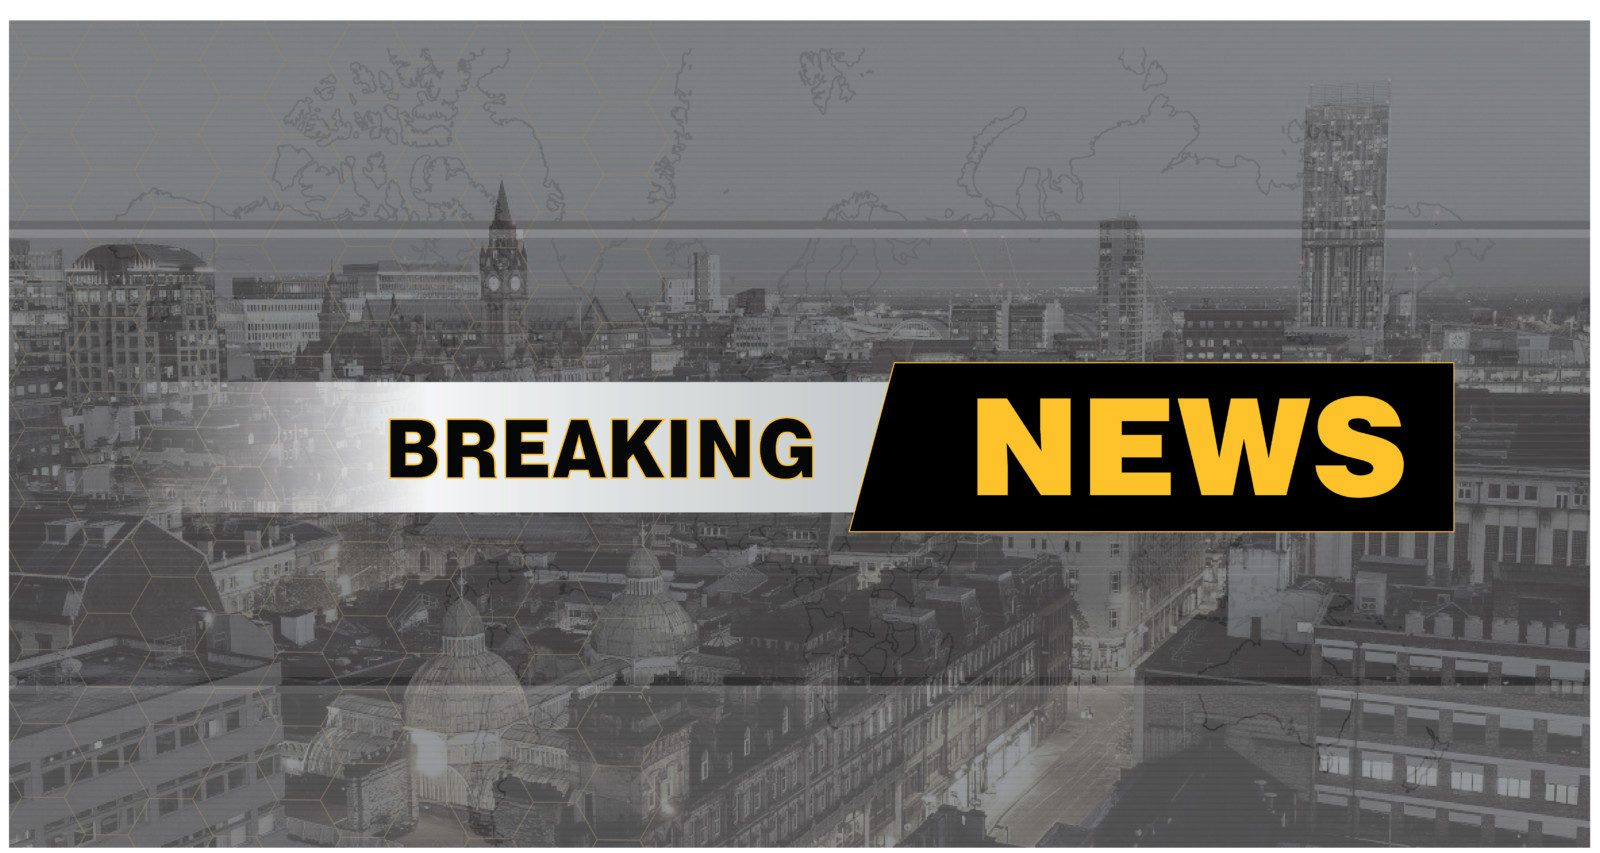 BREAKING: Restrictions lifted in Stockport &#8211; with Bolton expected to follow, The Manc